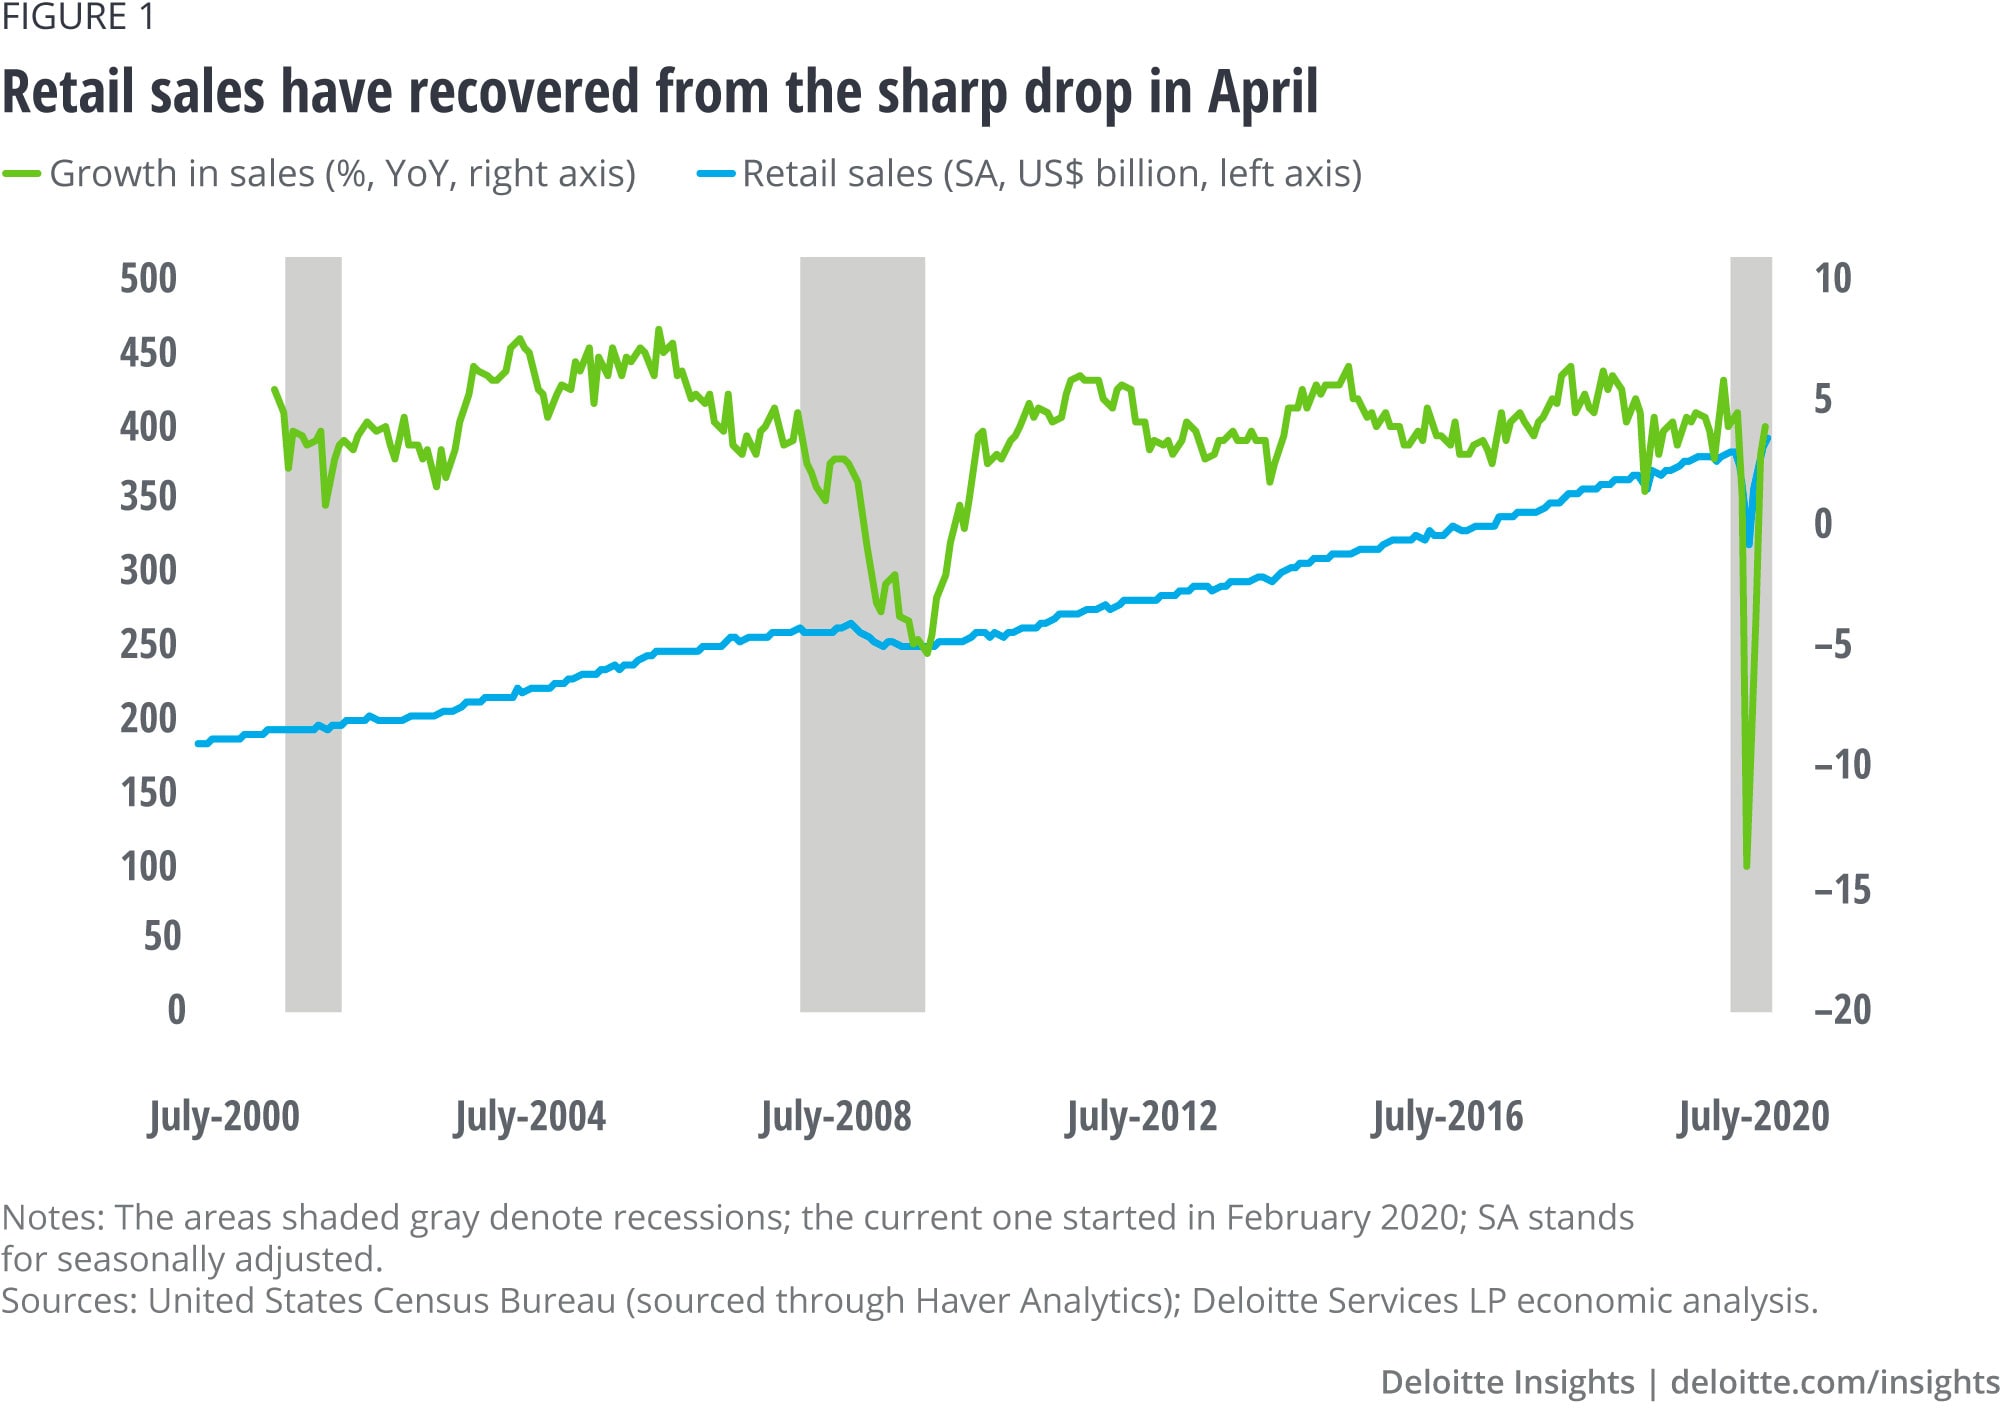 Retail sales have recovered from the sharp drop in April